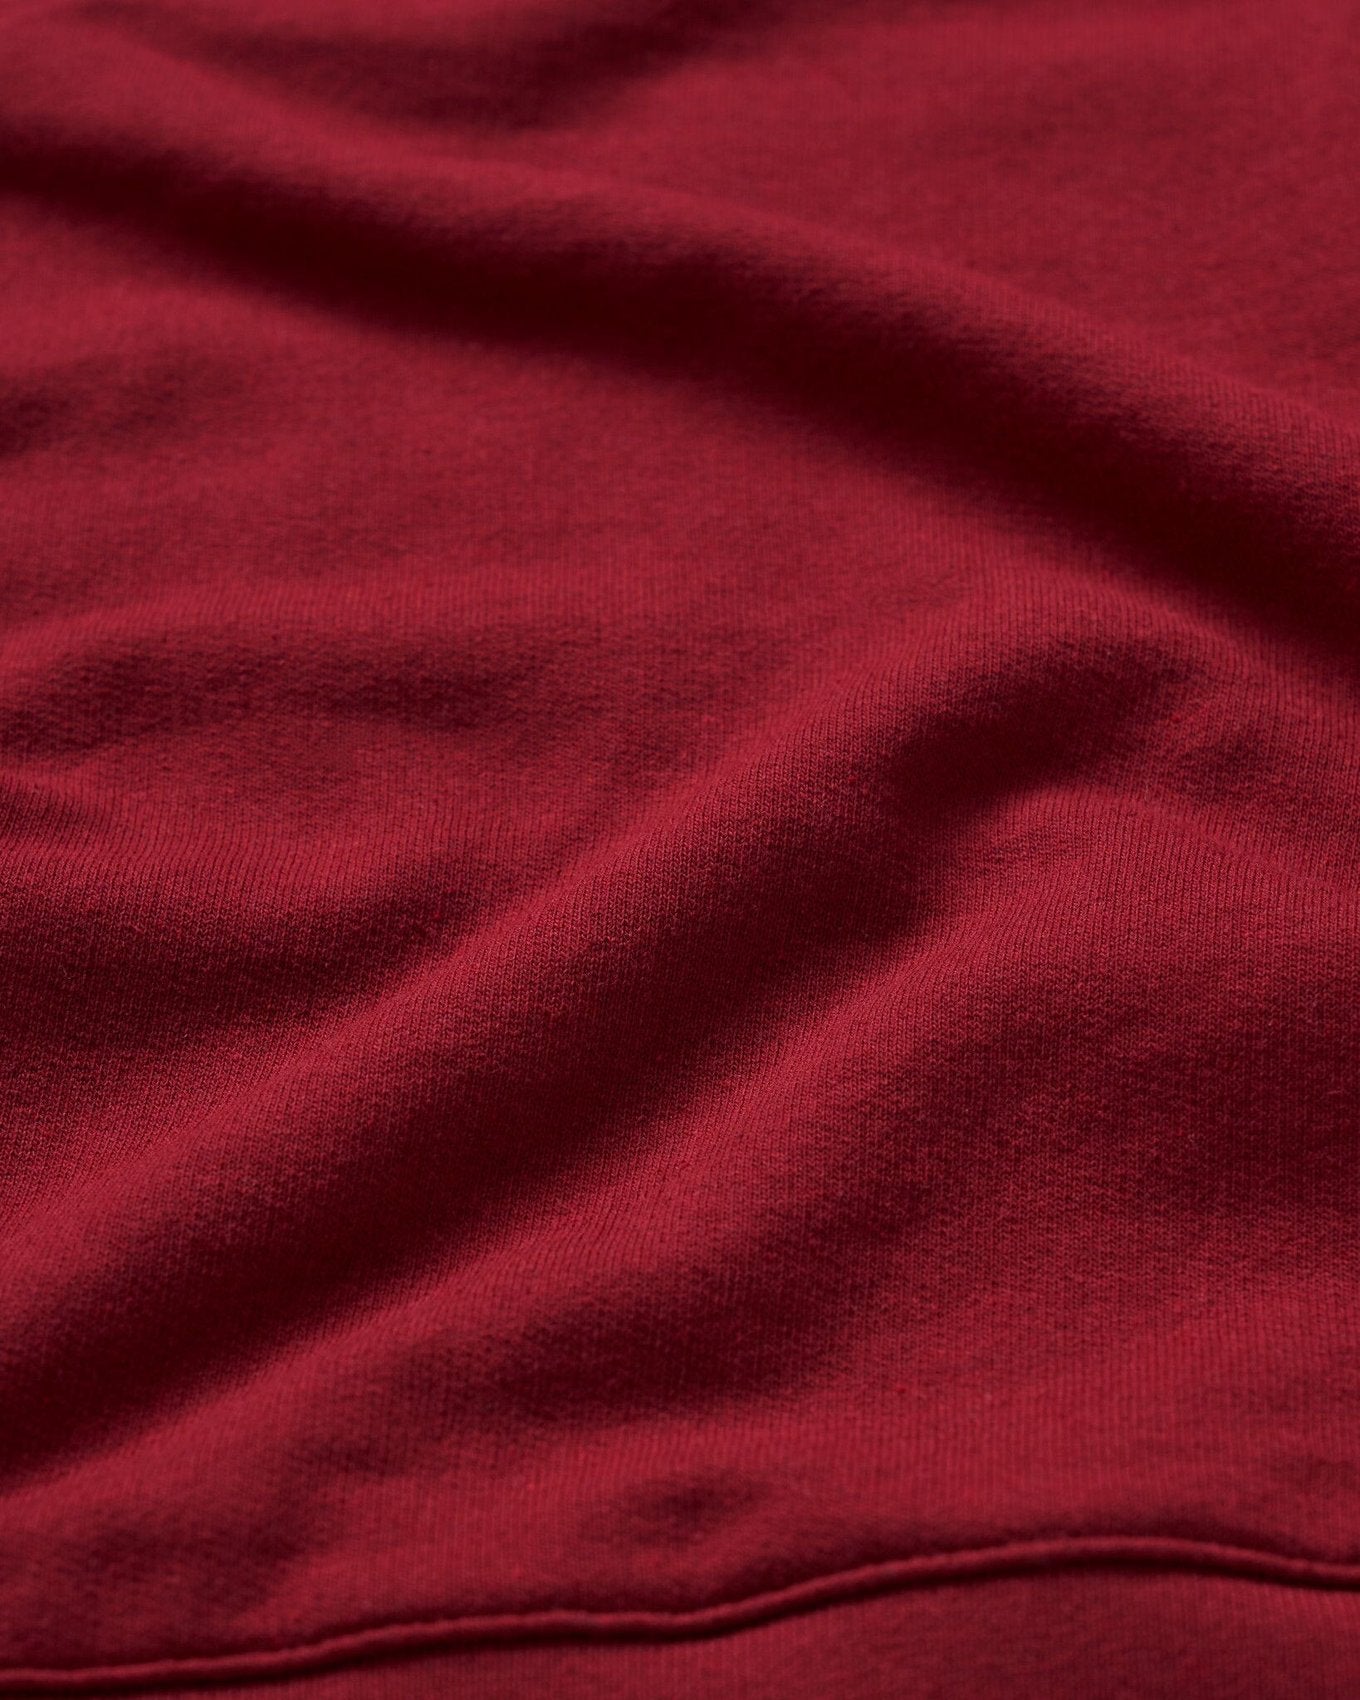 ReApparel Basura Crew Neck . in color Garnet and shape long sleeve